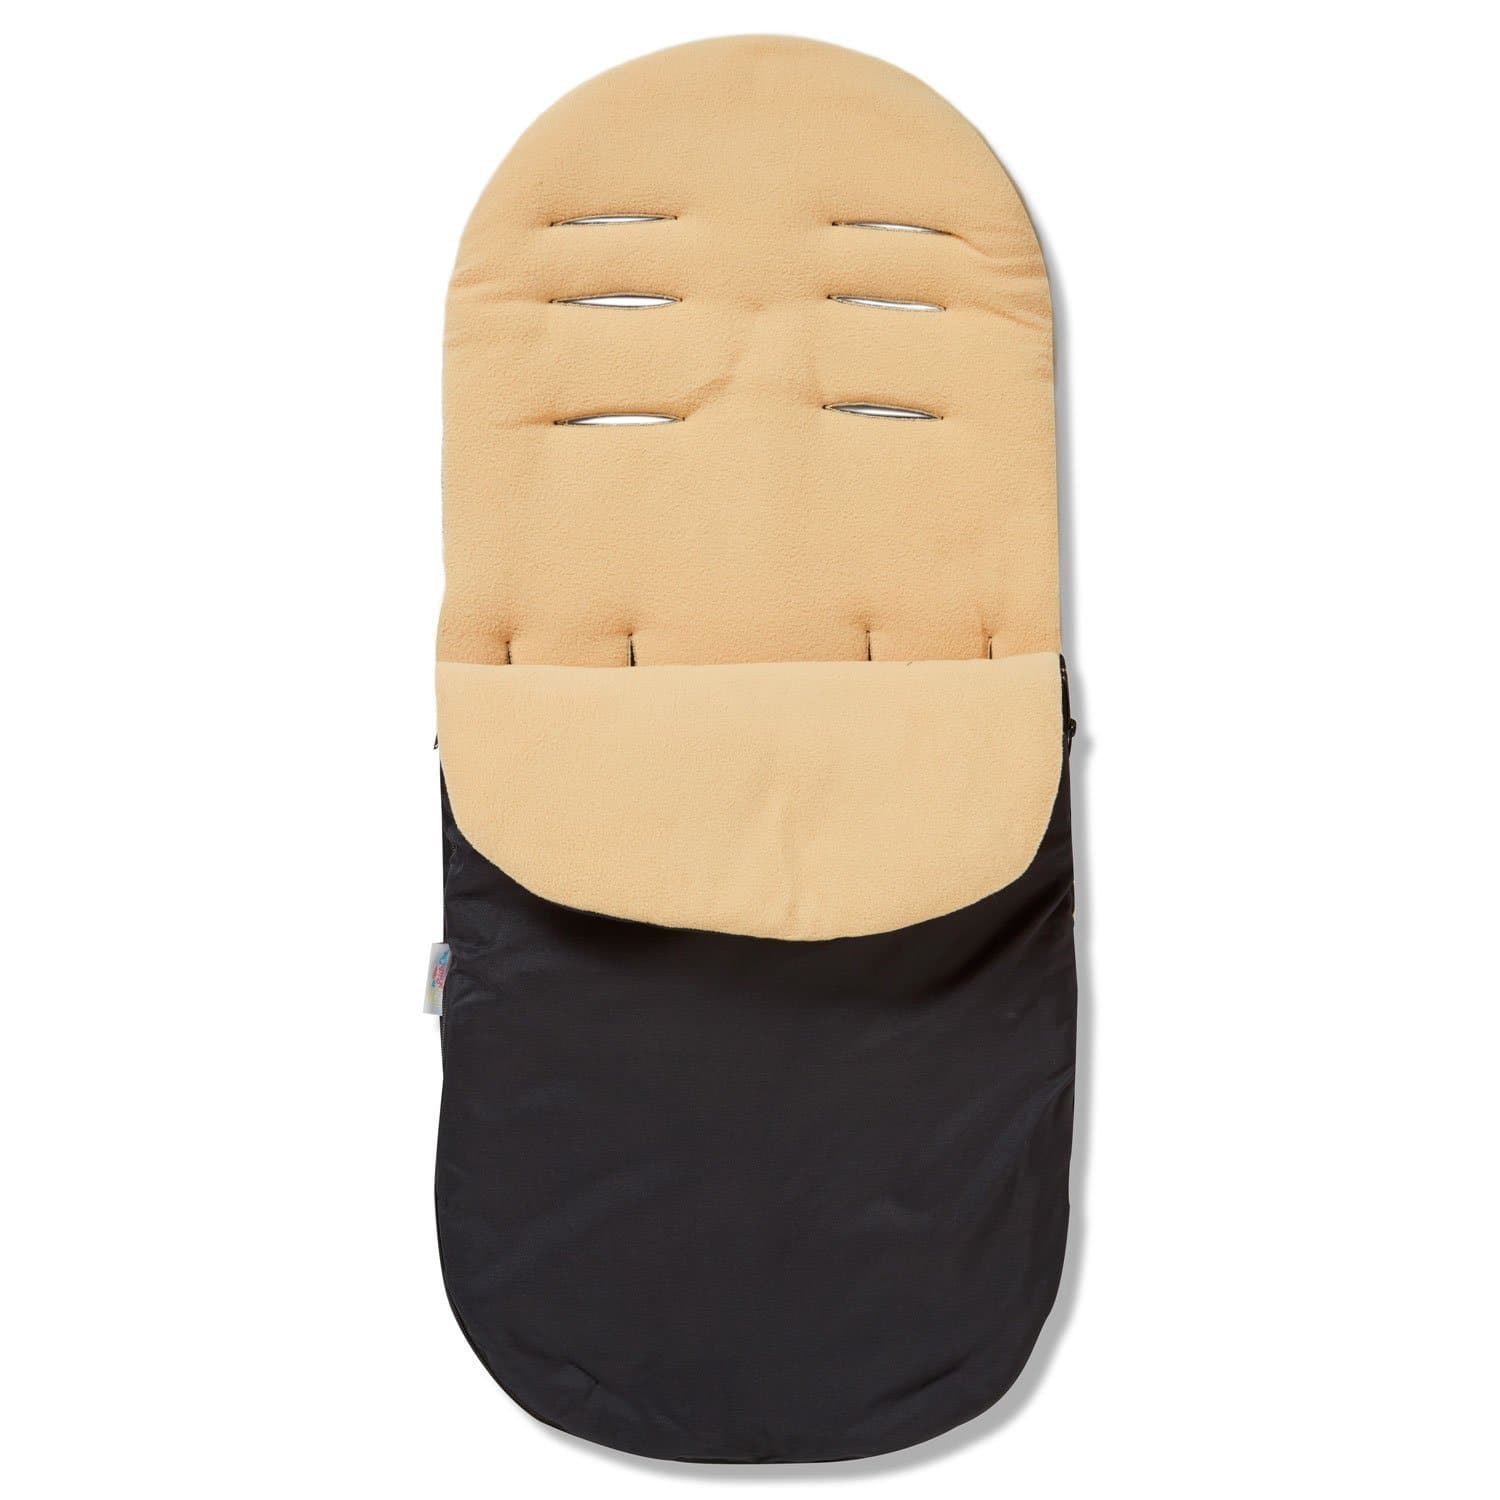 Footmuff / Cosy Toes Compatible with Quax - For Your Little One